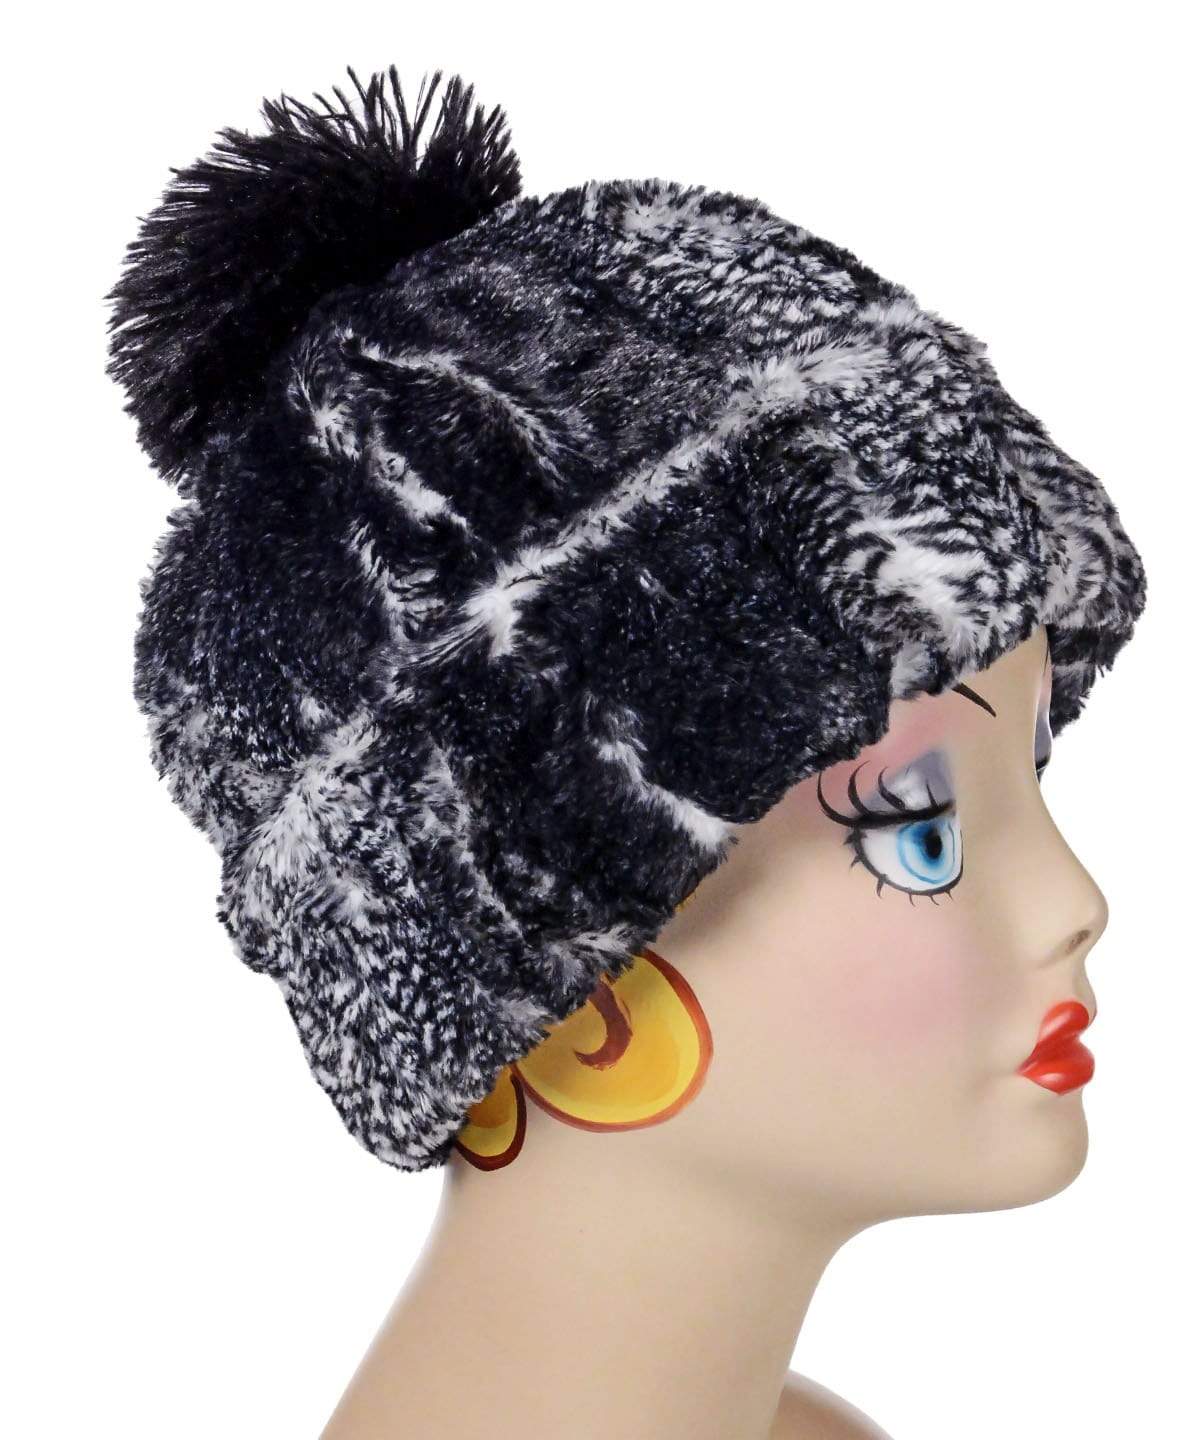 Beanie Hat reversible in Black Mamba and Cuddly Black Faux Fur with Pom. Handmade by Pandemonium Millinery in Seattle, WA.